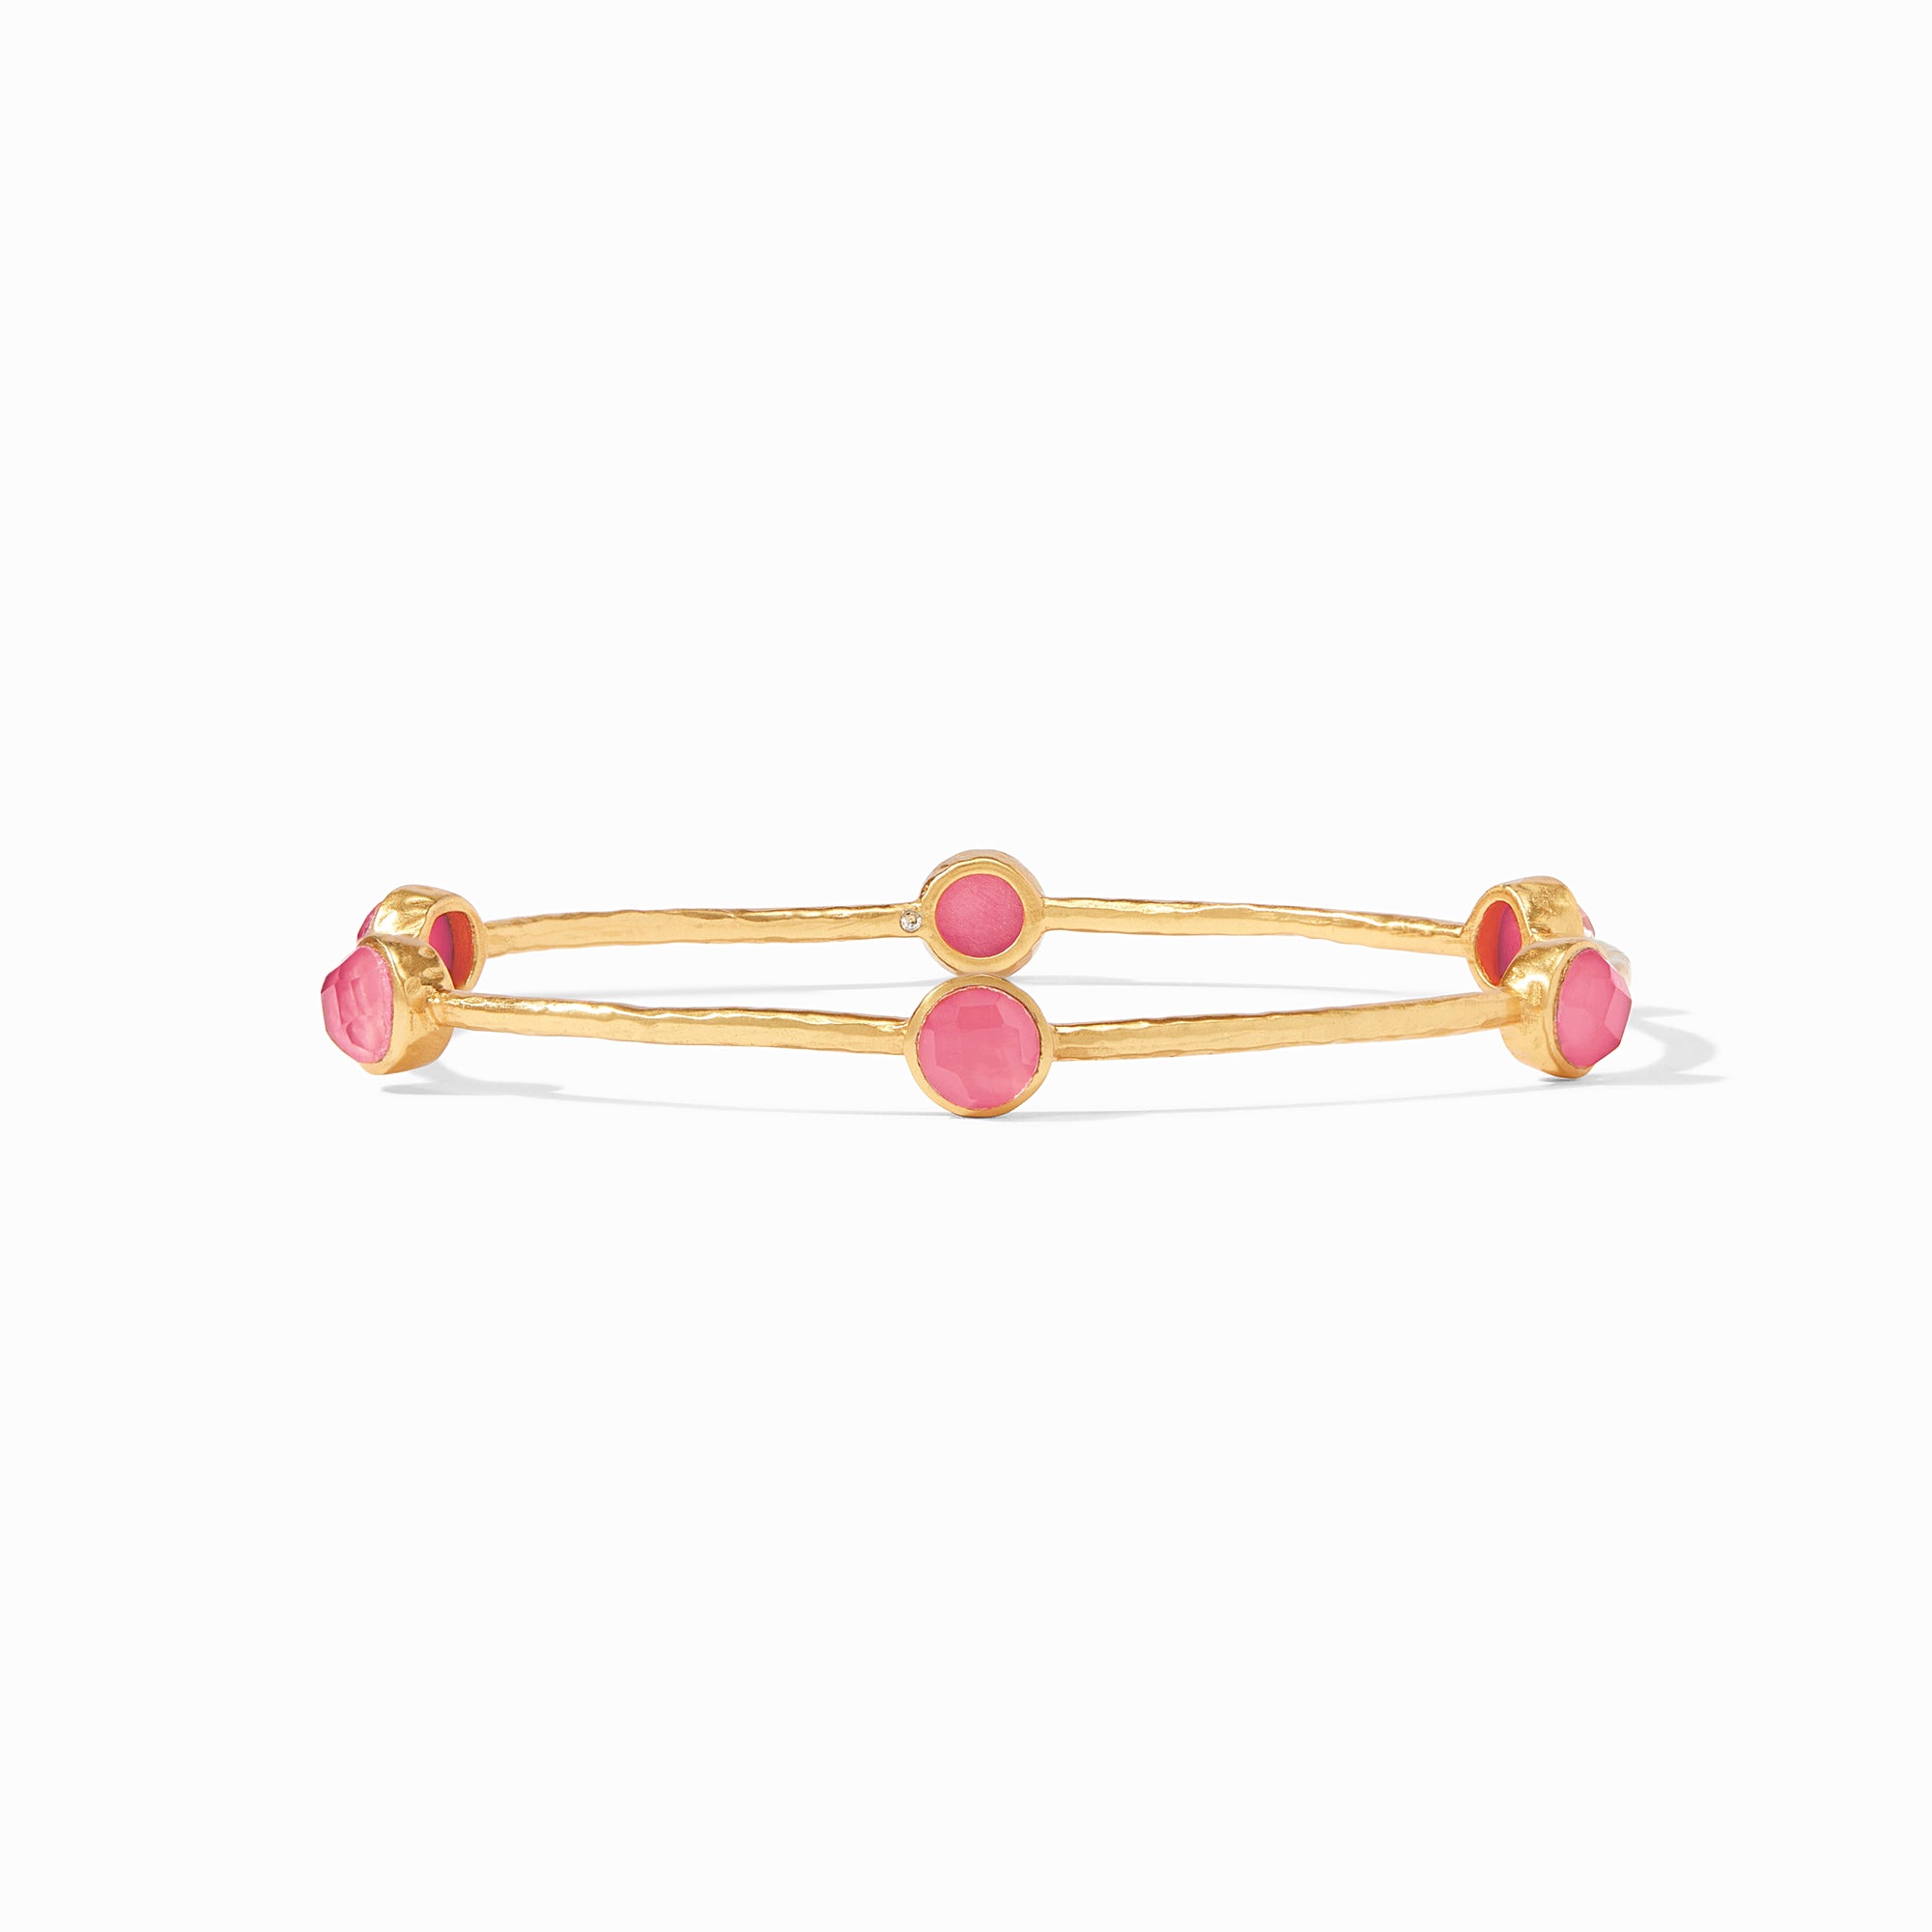 Julie Vos - Milano Luxe Bangle, Iridescent Peony Pink / Large